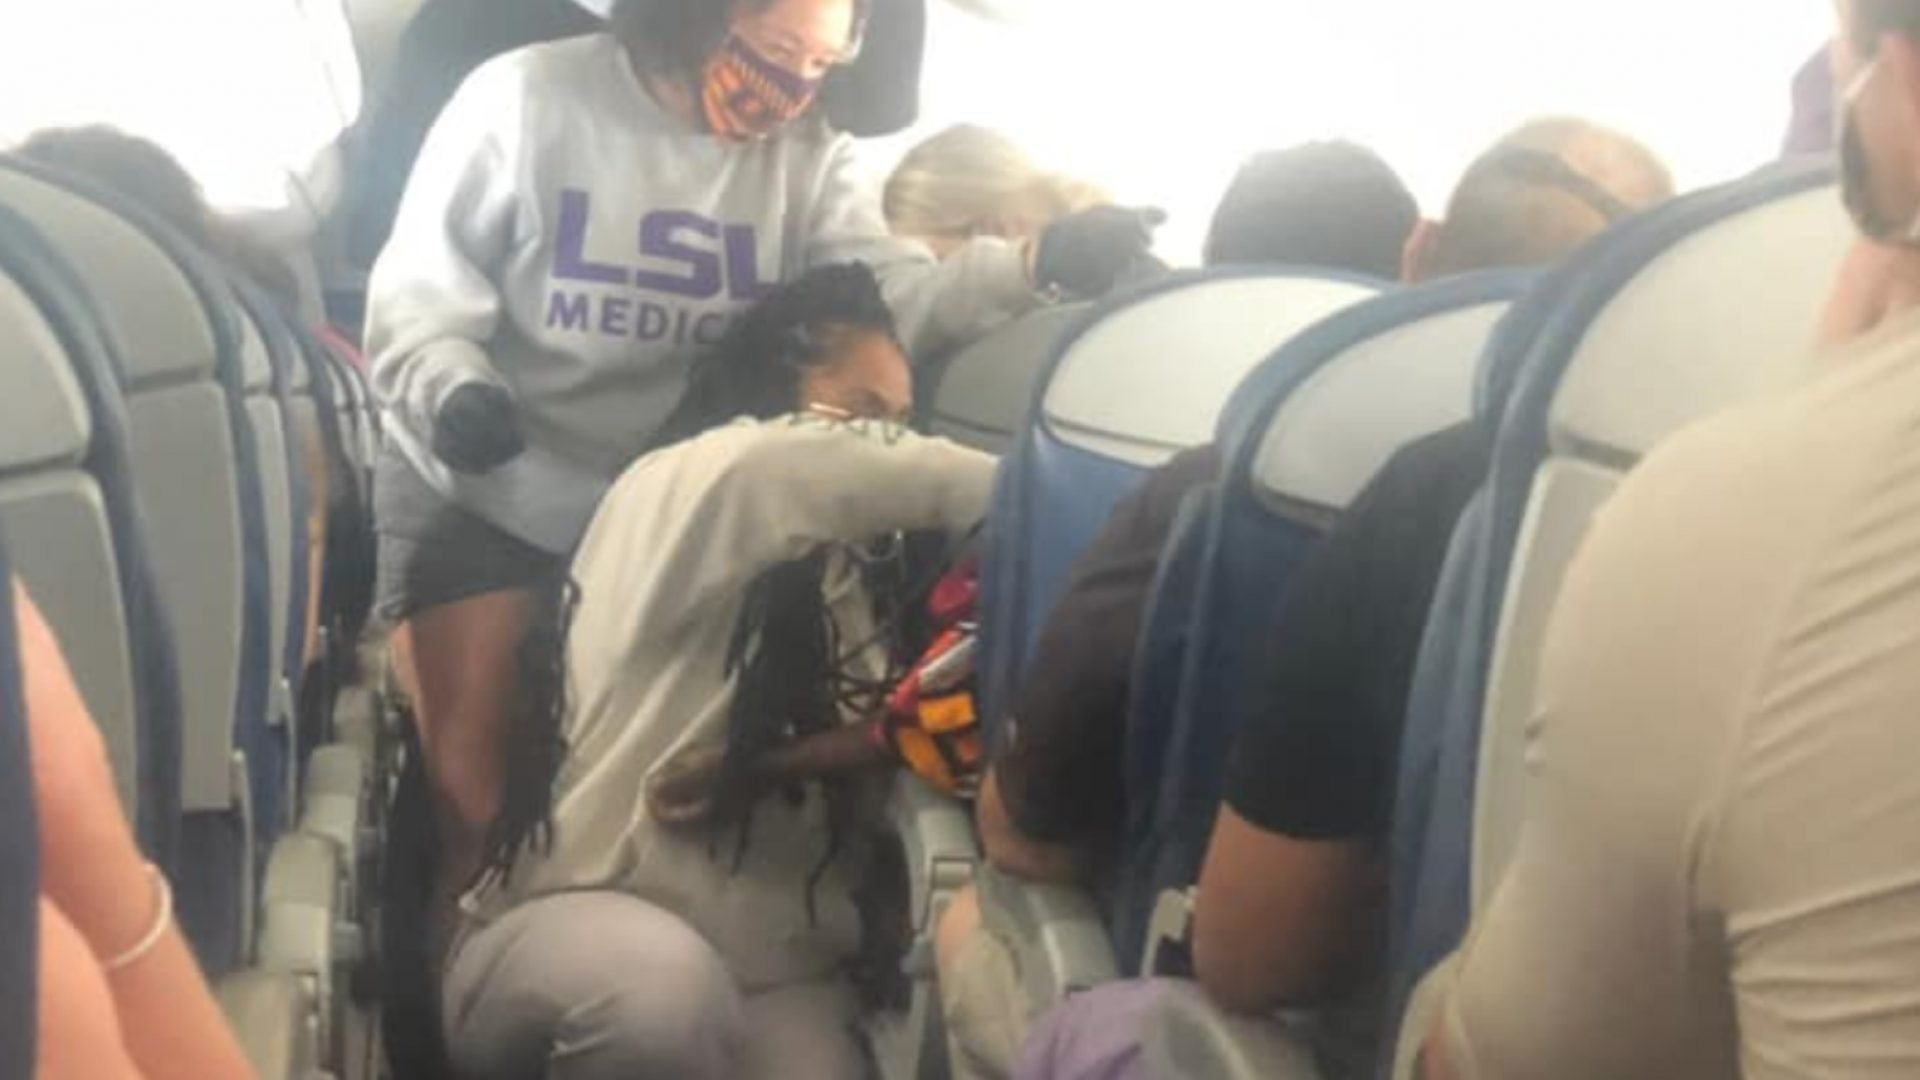 Black Women To The Rescue: Two Med School Students Help Passenger In Distress Mid-Flight